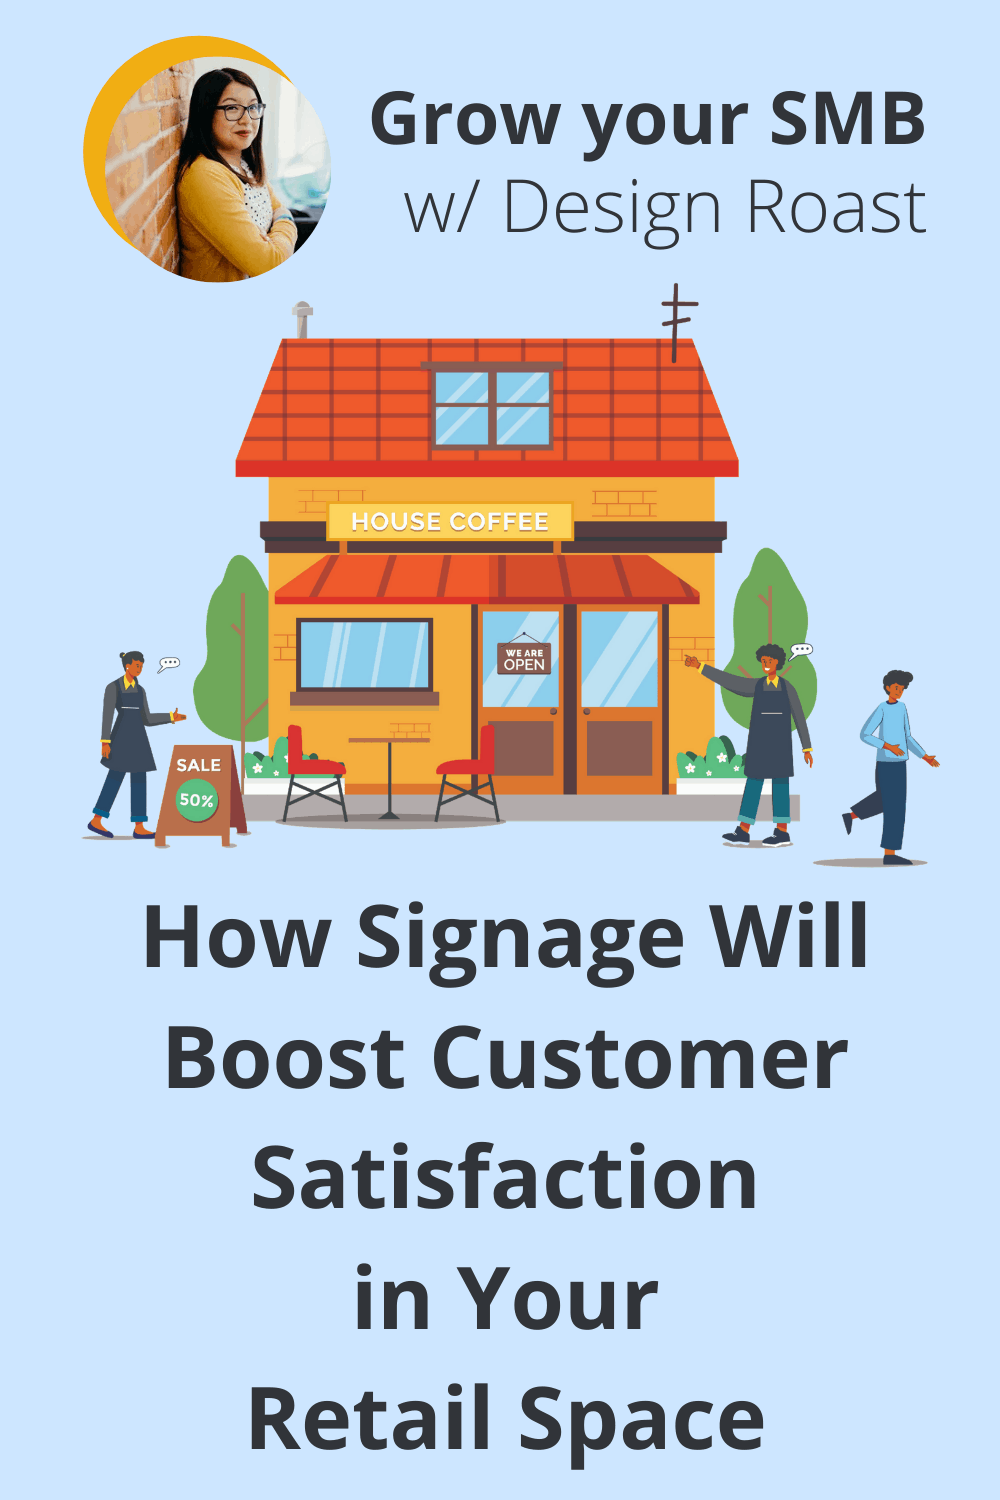 One of the most effective ways of having sales is through signage in your retail space. It can improve the user experience and increase foot traffic when used correctly. via @scopedesign